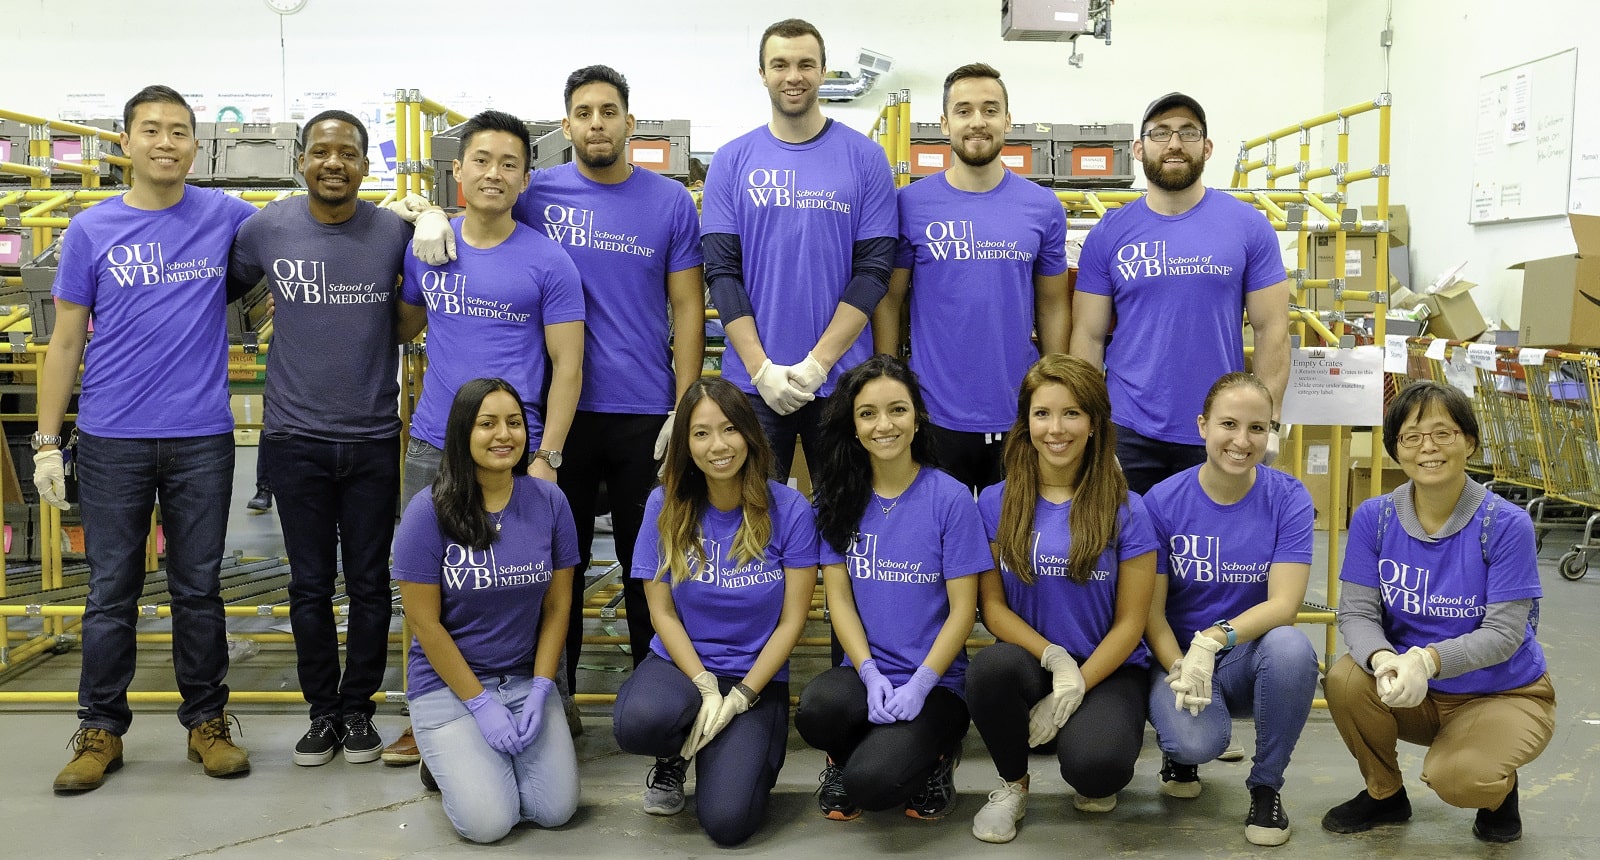 A group photo of OUWB students volunteering at World Medical Relief. The group is wearing their blue OUWB t-shirts and standing in front of a large shelf of medical supplies. 